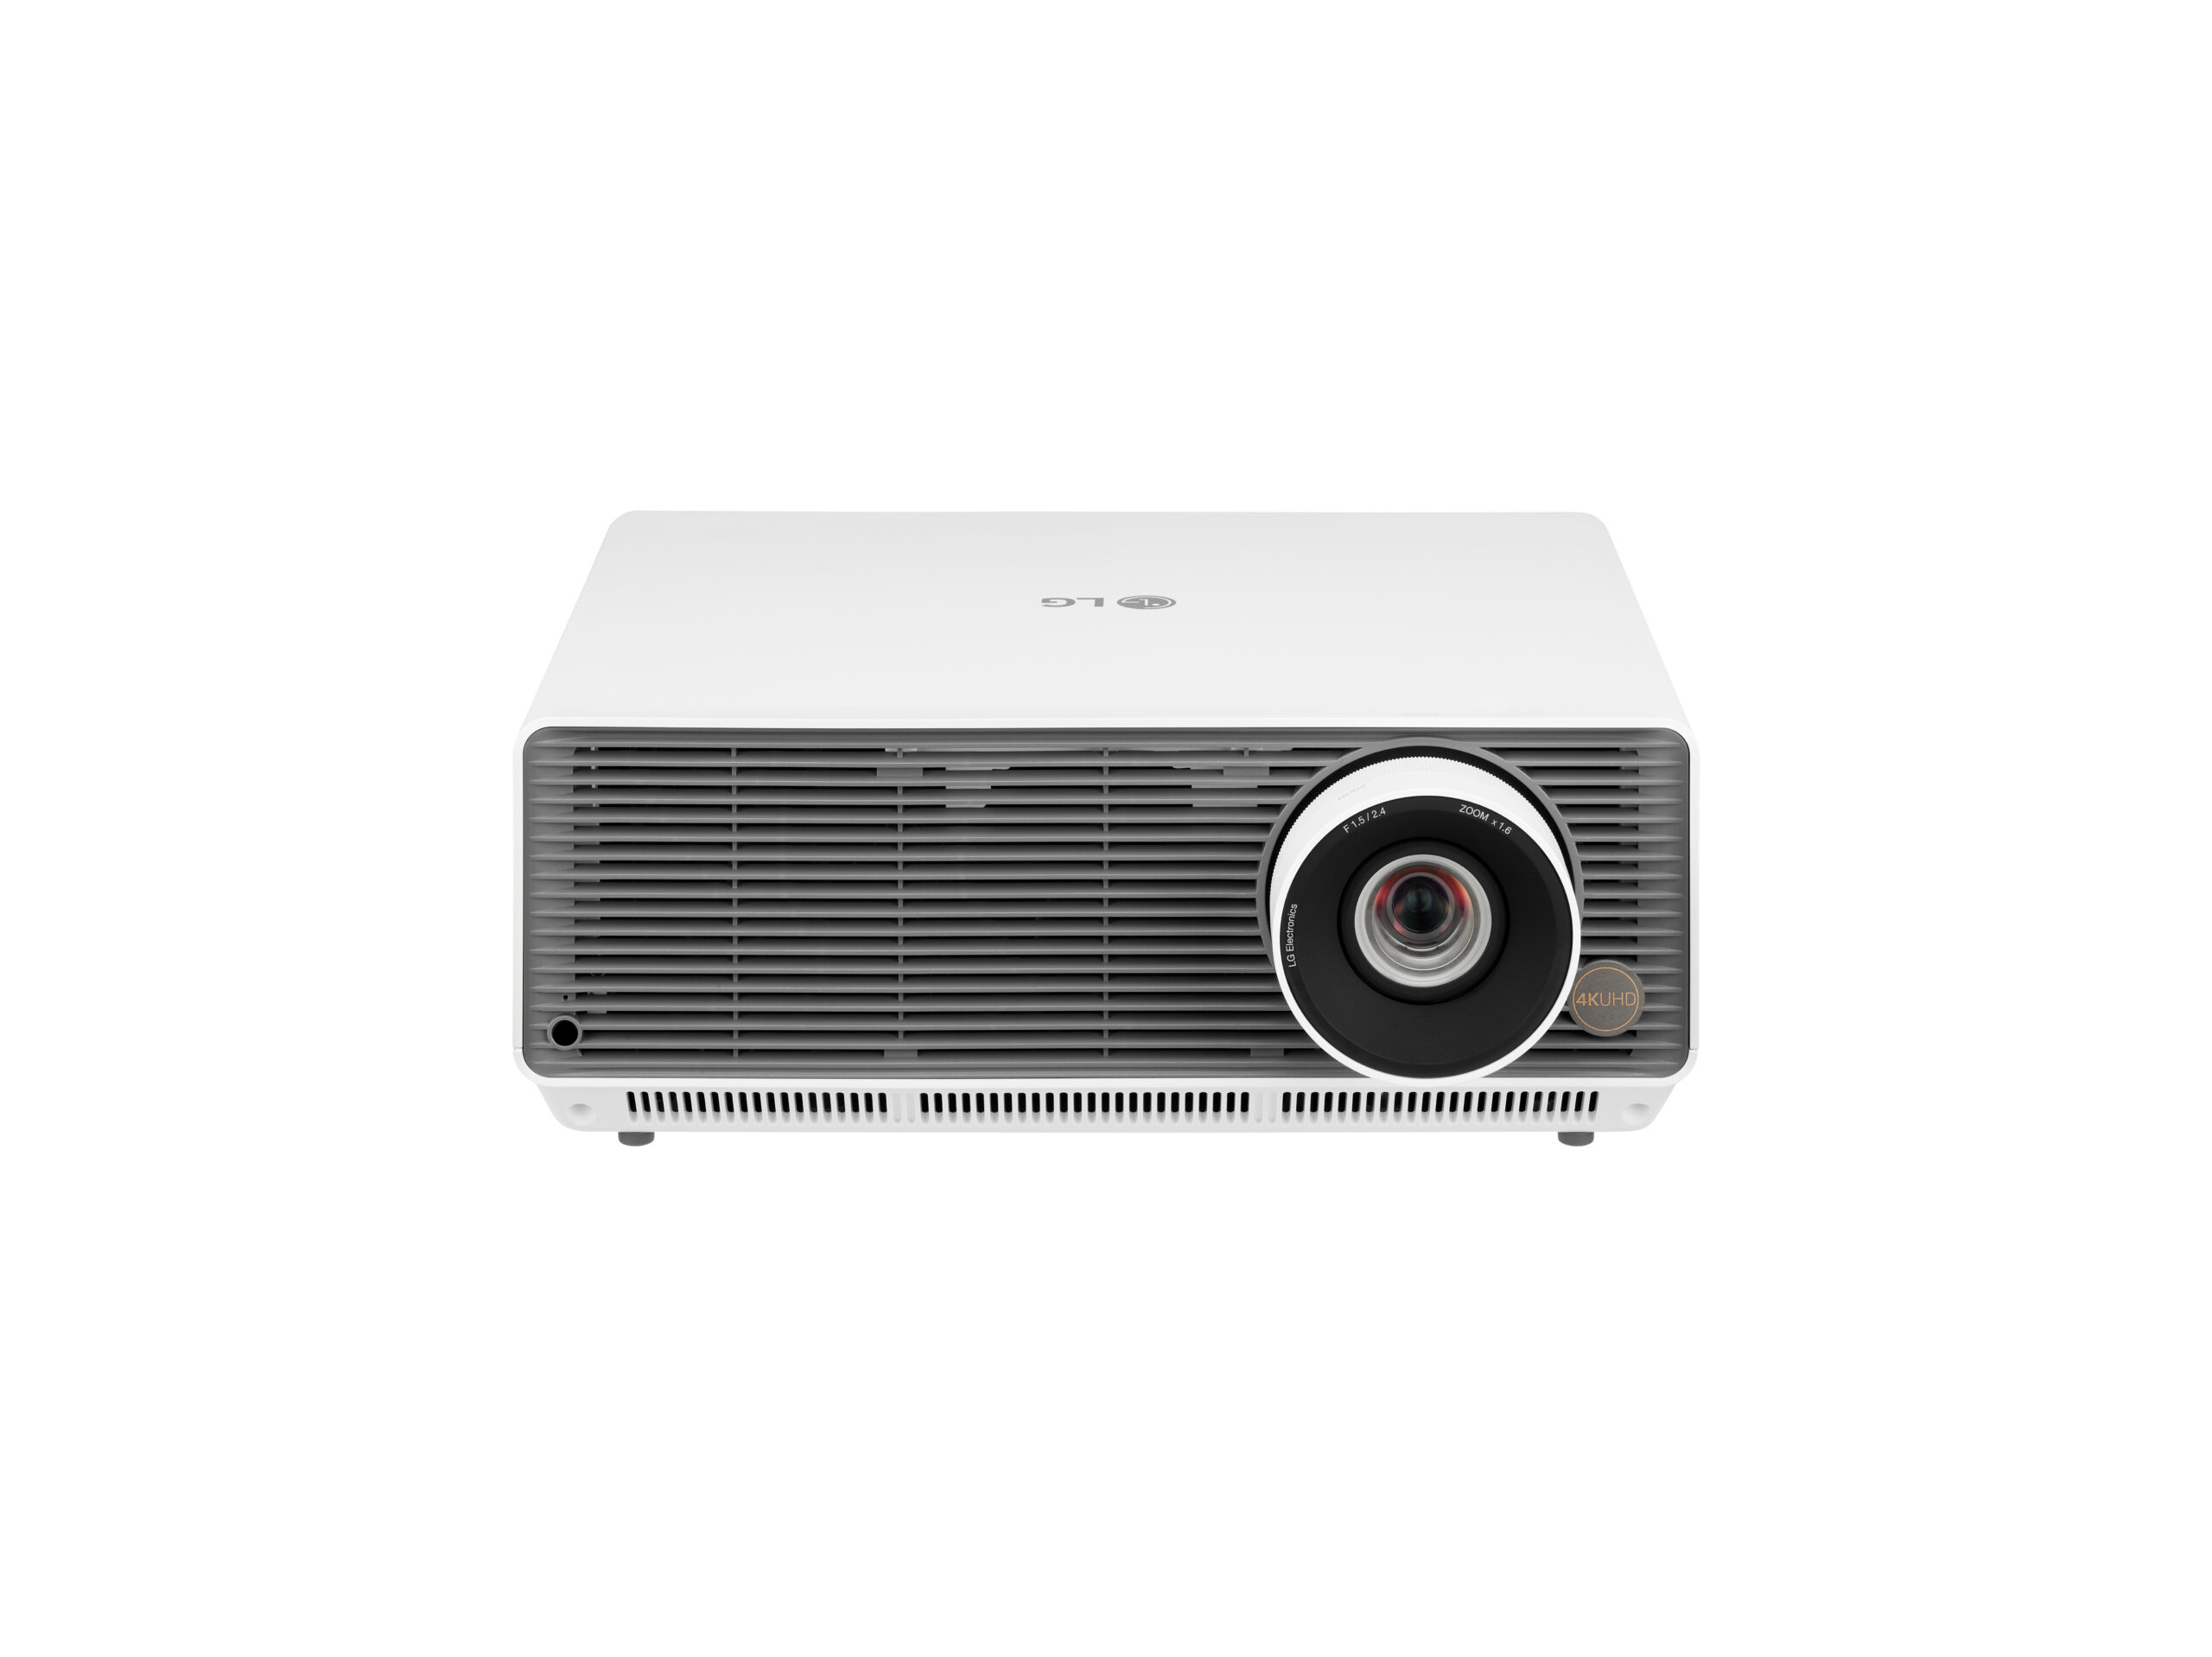 LG expands ProBeam lineup of business projectors; adds two new models